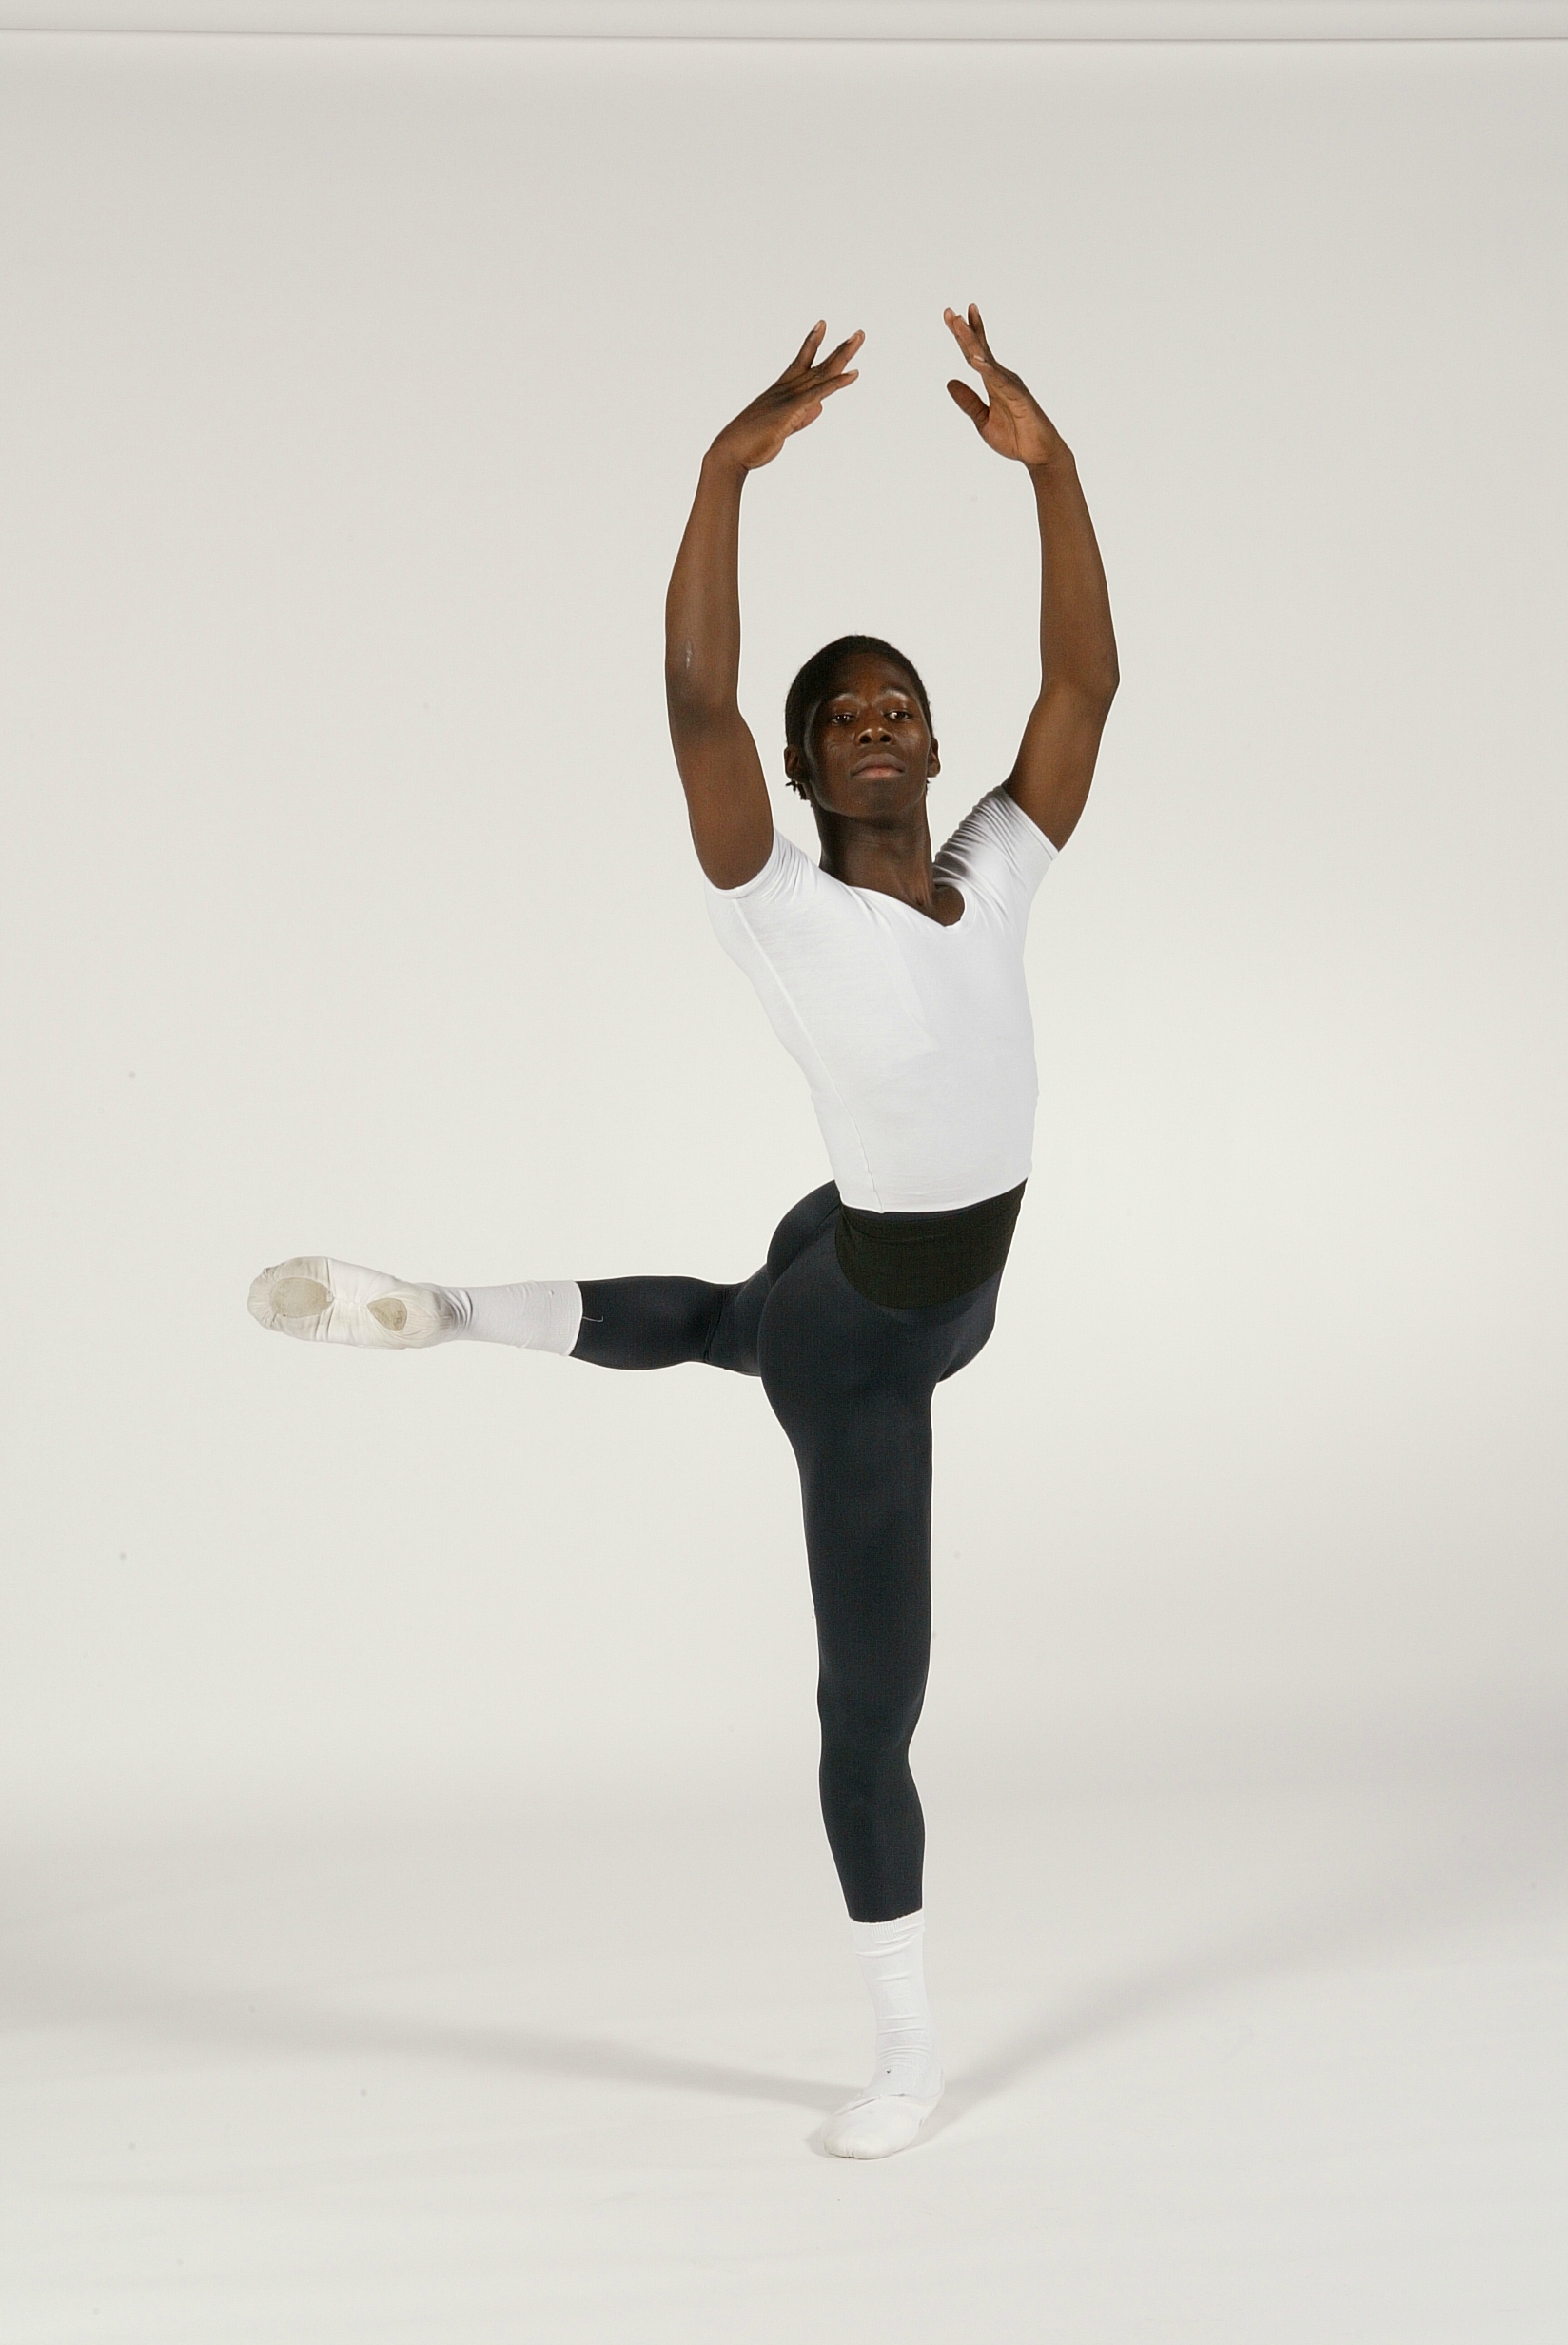 Brooklyn started dance training at age 12 with the Pavlovich Dance School in Columbia. Following this, he received a scholarship to study at the Kirov Academy of Ballet under the auspices of Anatoli Kucheruk and Vladimir Djouloukhadze.